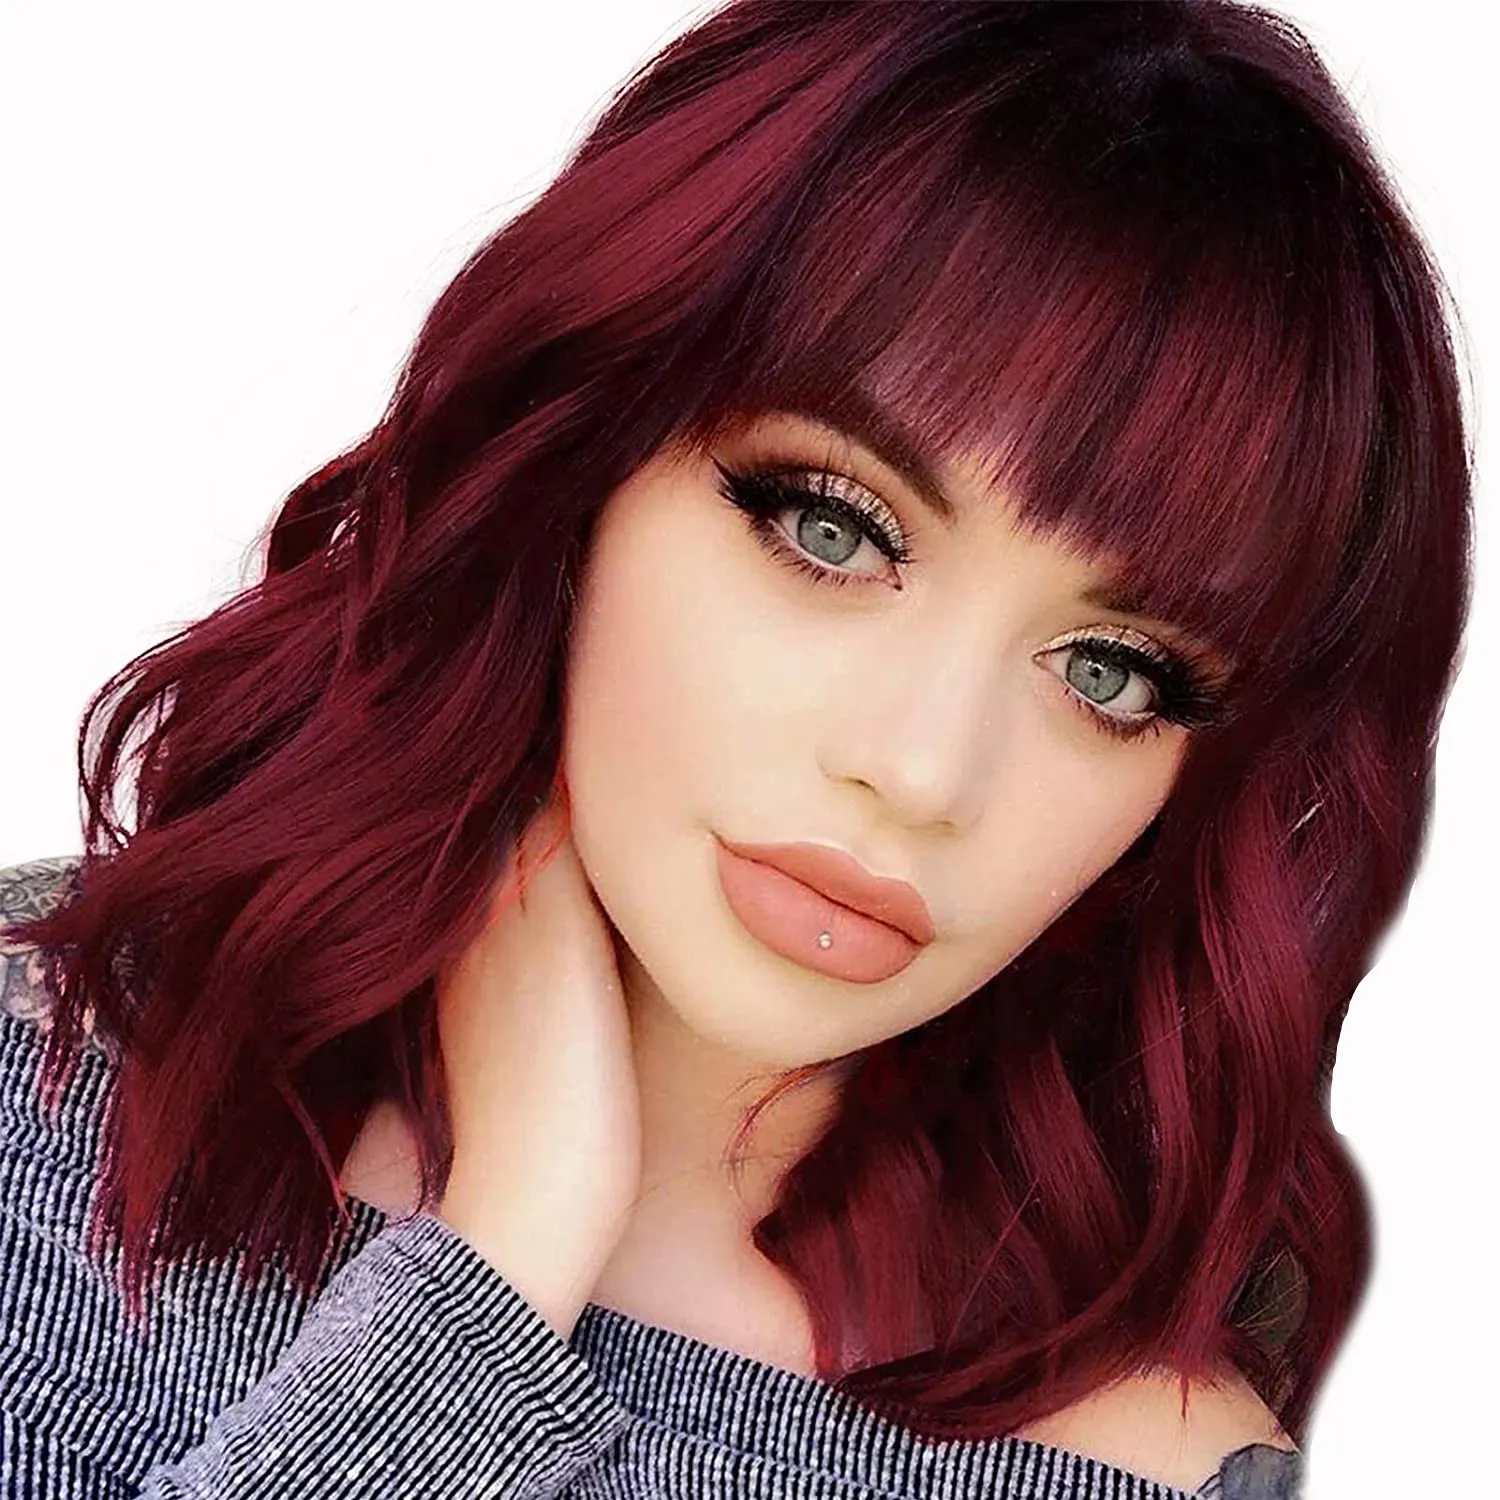 Bob Curly Wig Synthetic Short Wine Red Wigs with Bangs Cosplay Heat Resistant Fiber Natural Looking Wig